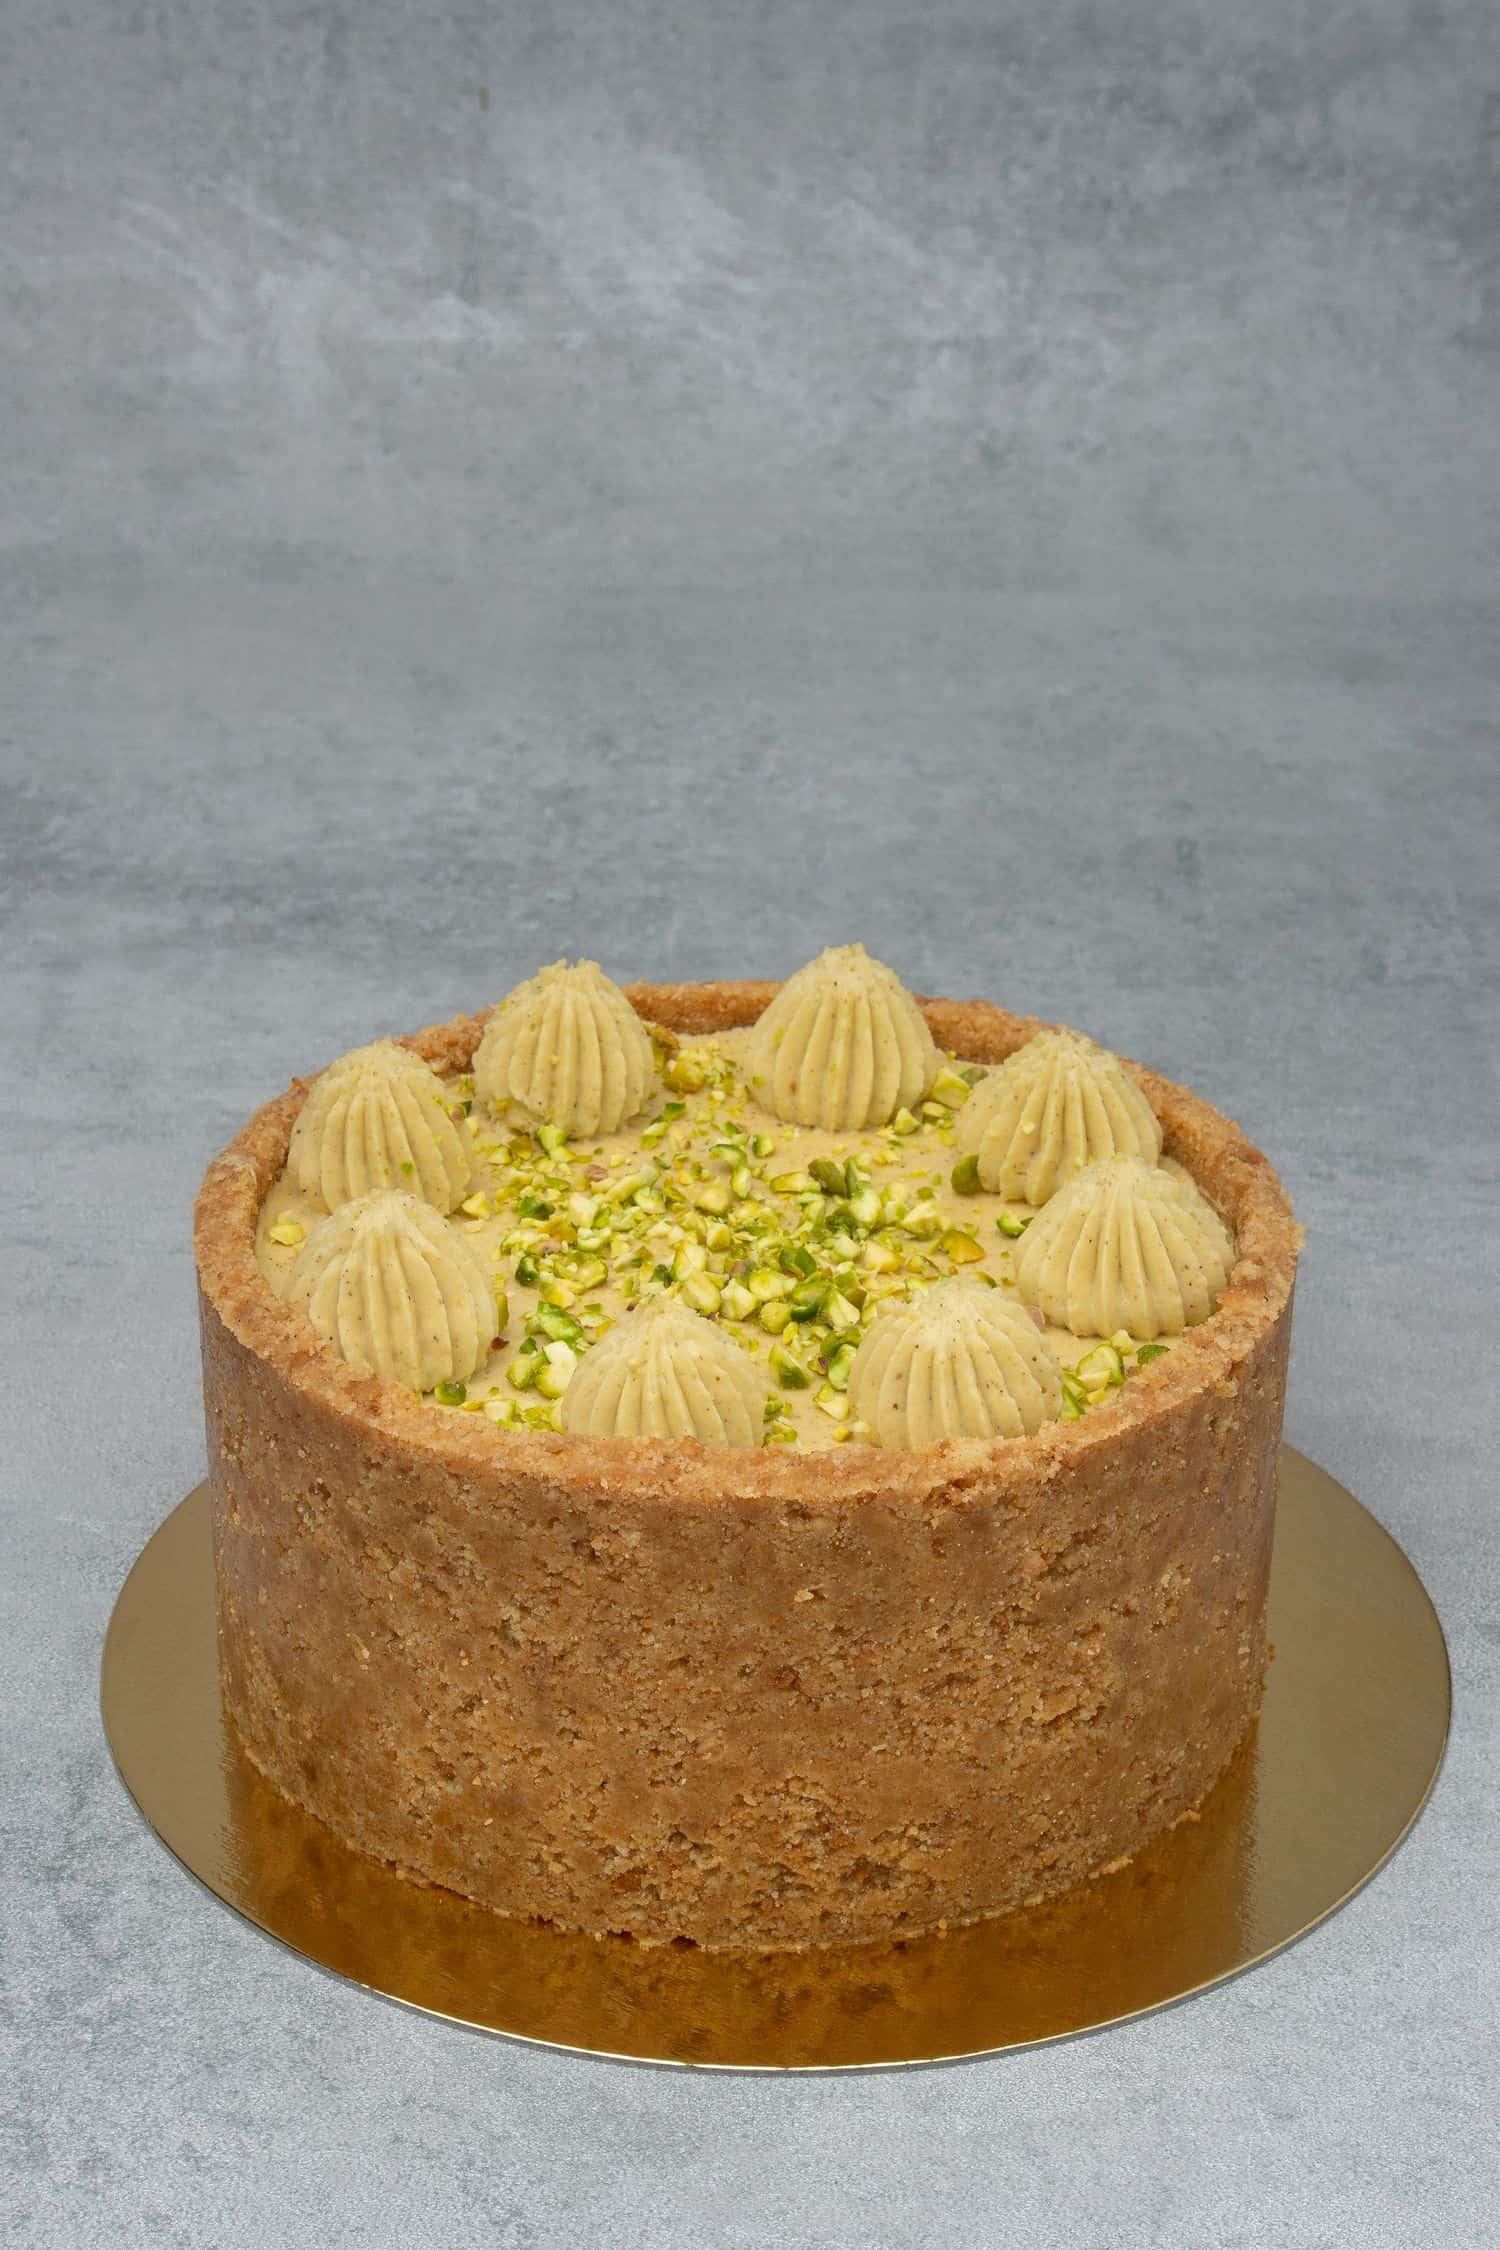 Pistachio cheesecake on a gold paper plate.